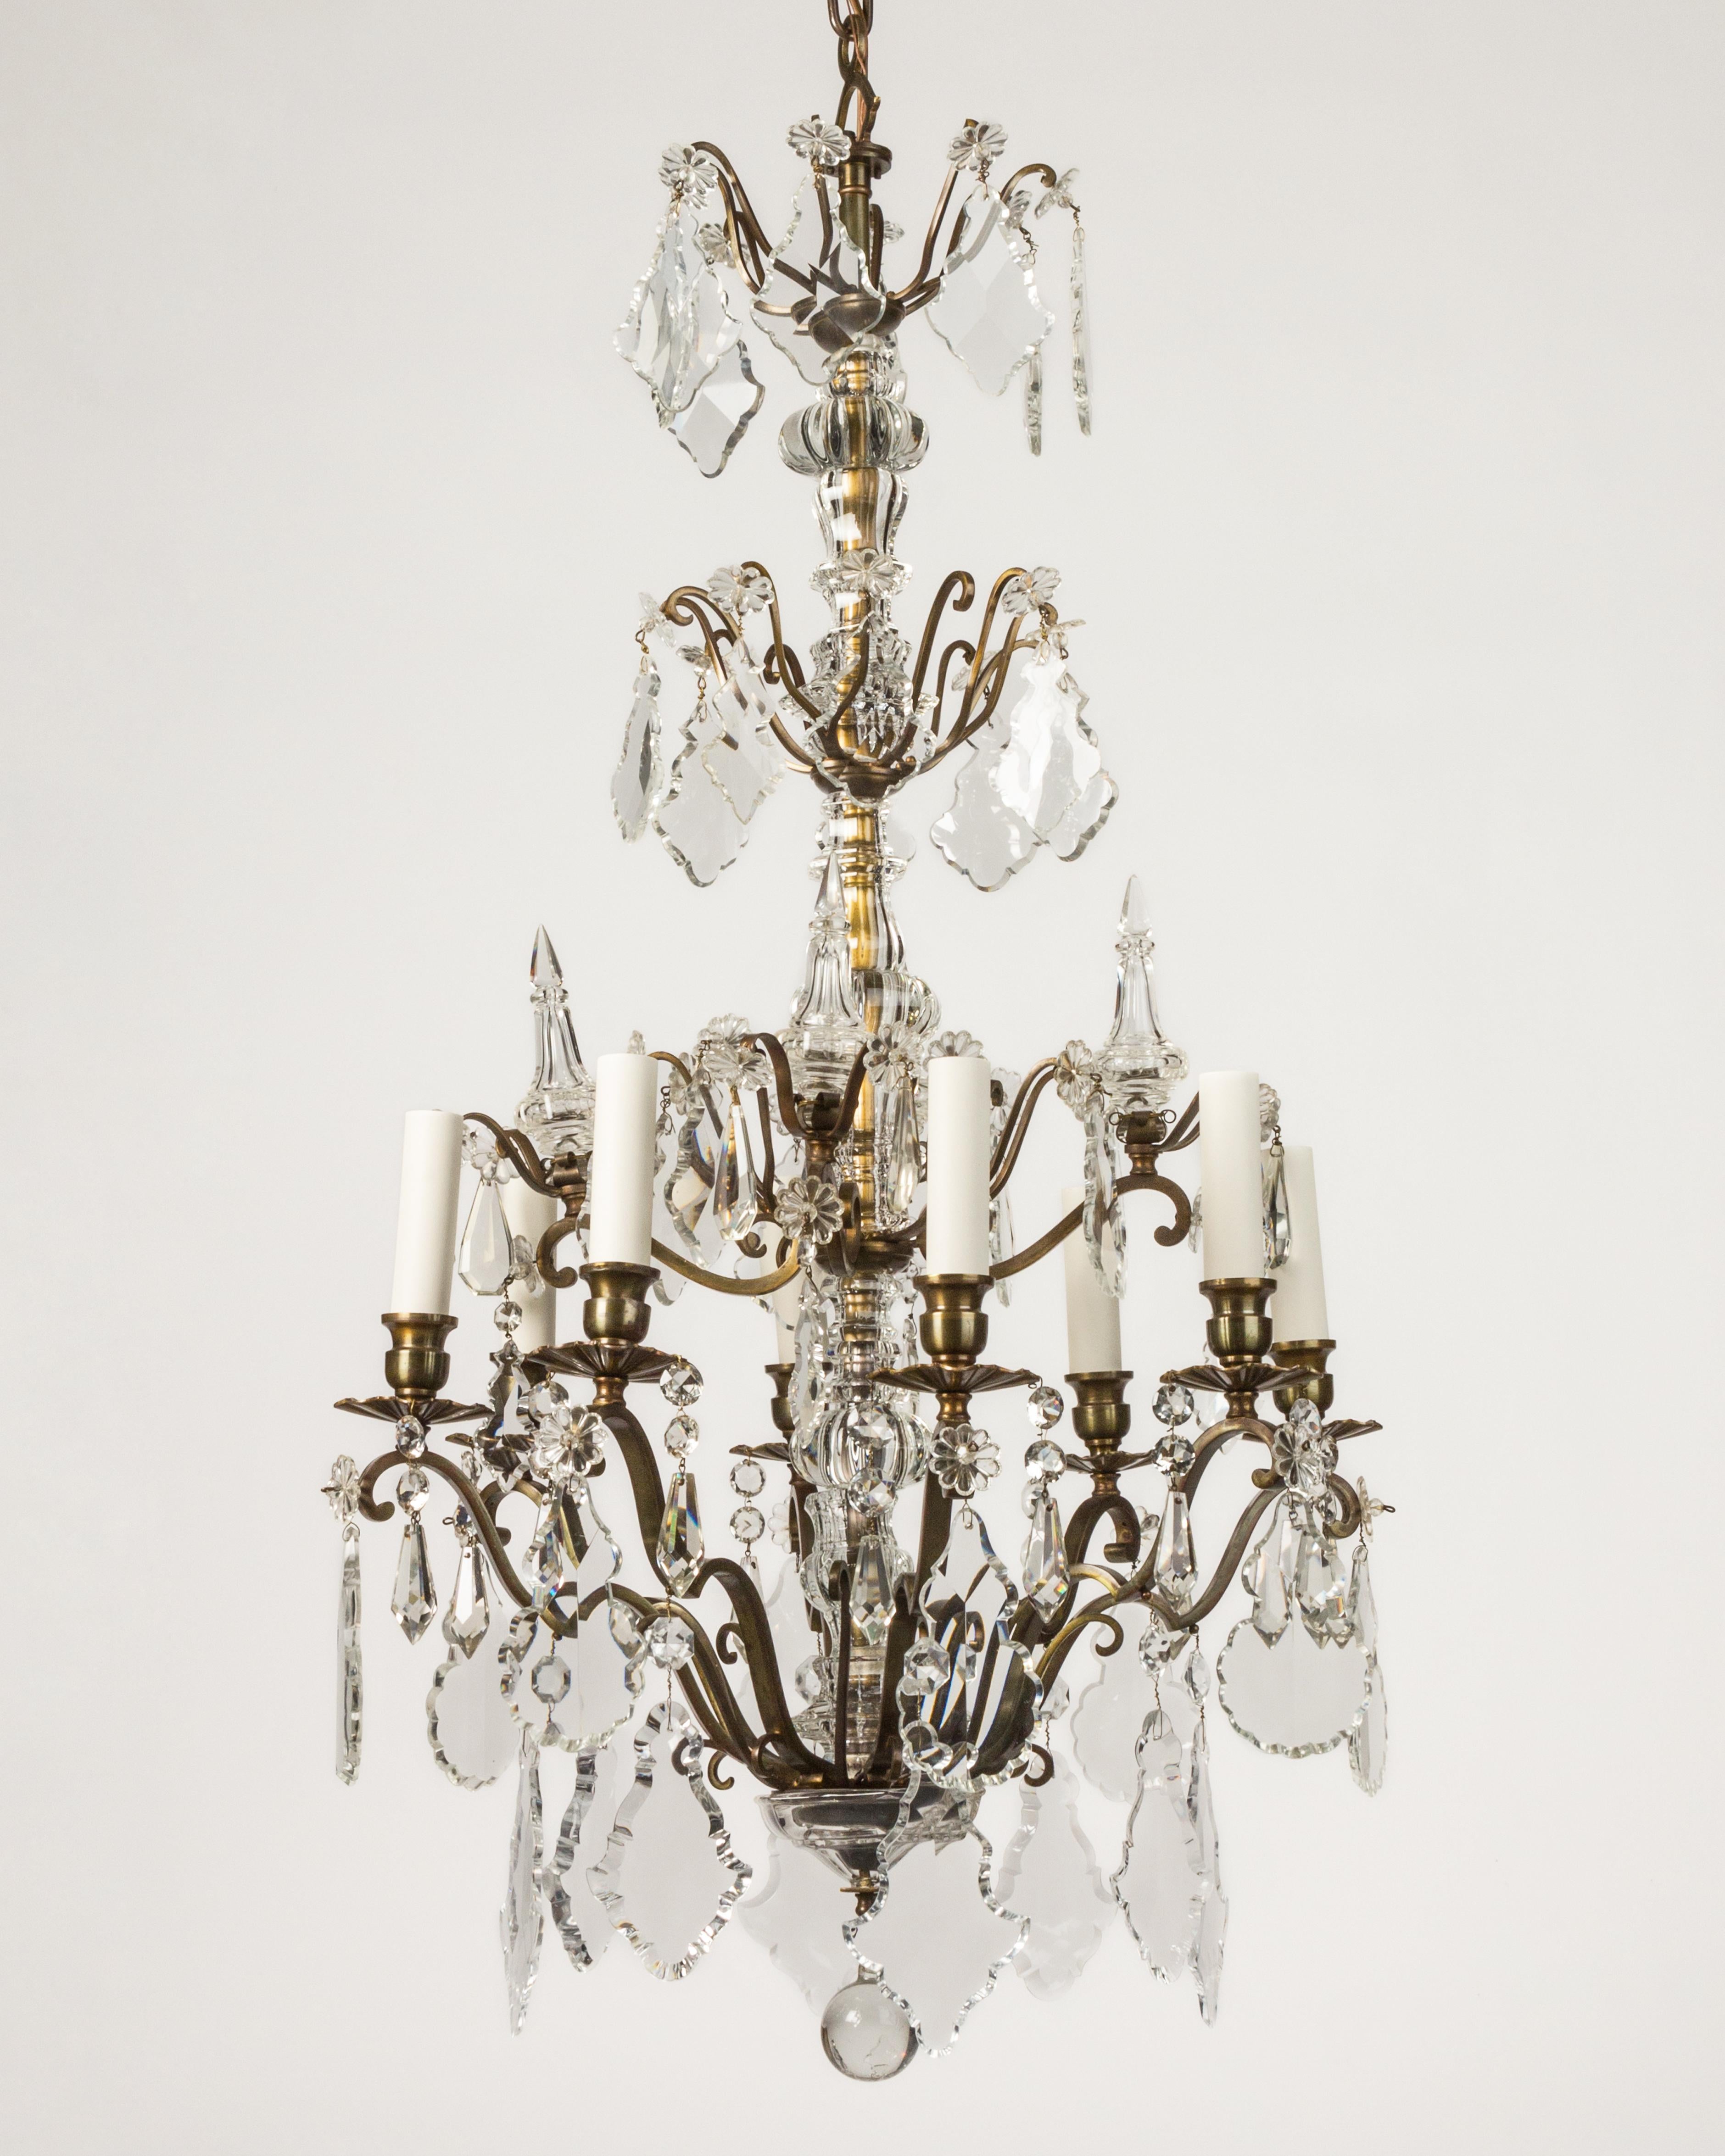 An eight arm chandelier with central glass columns and four tiers dressed with faceted crystal prisms and spires. In its original aged darkened brass finish.

Dimensions:
Current height: 82